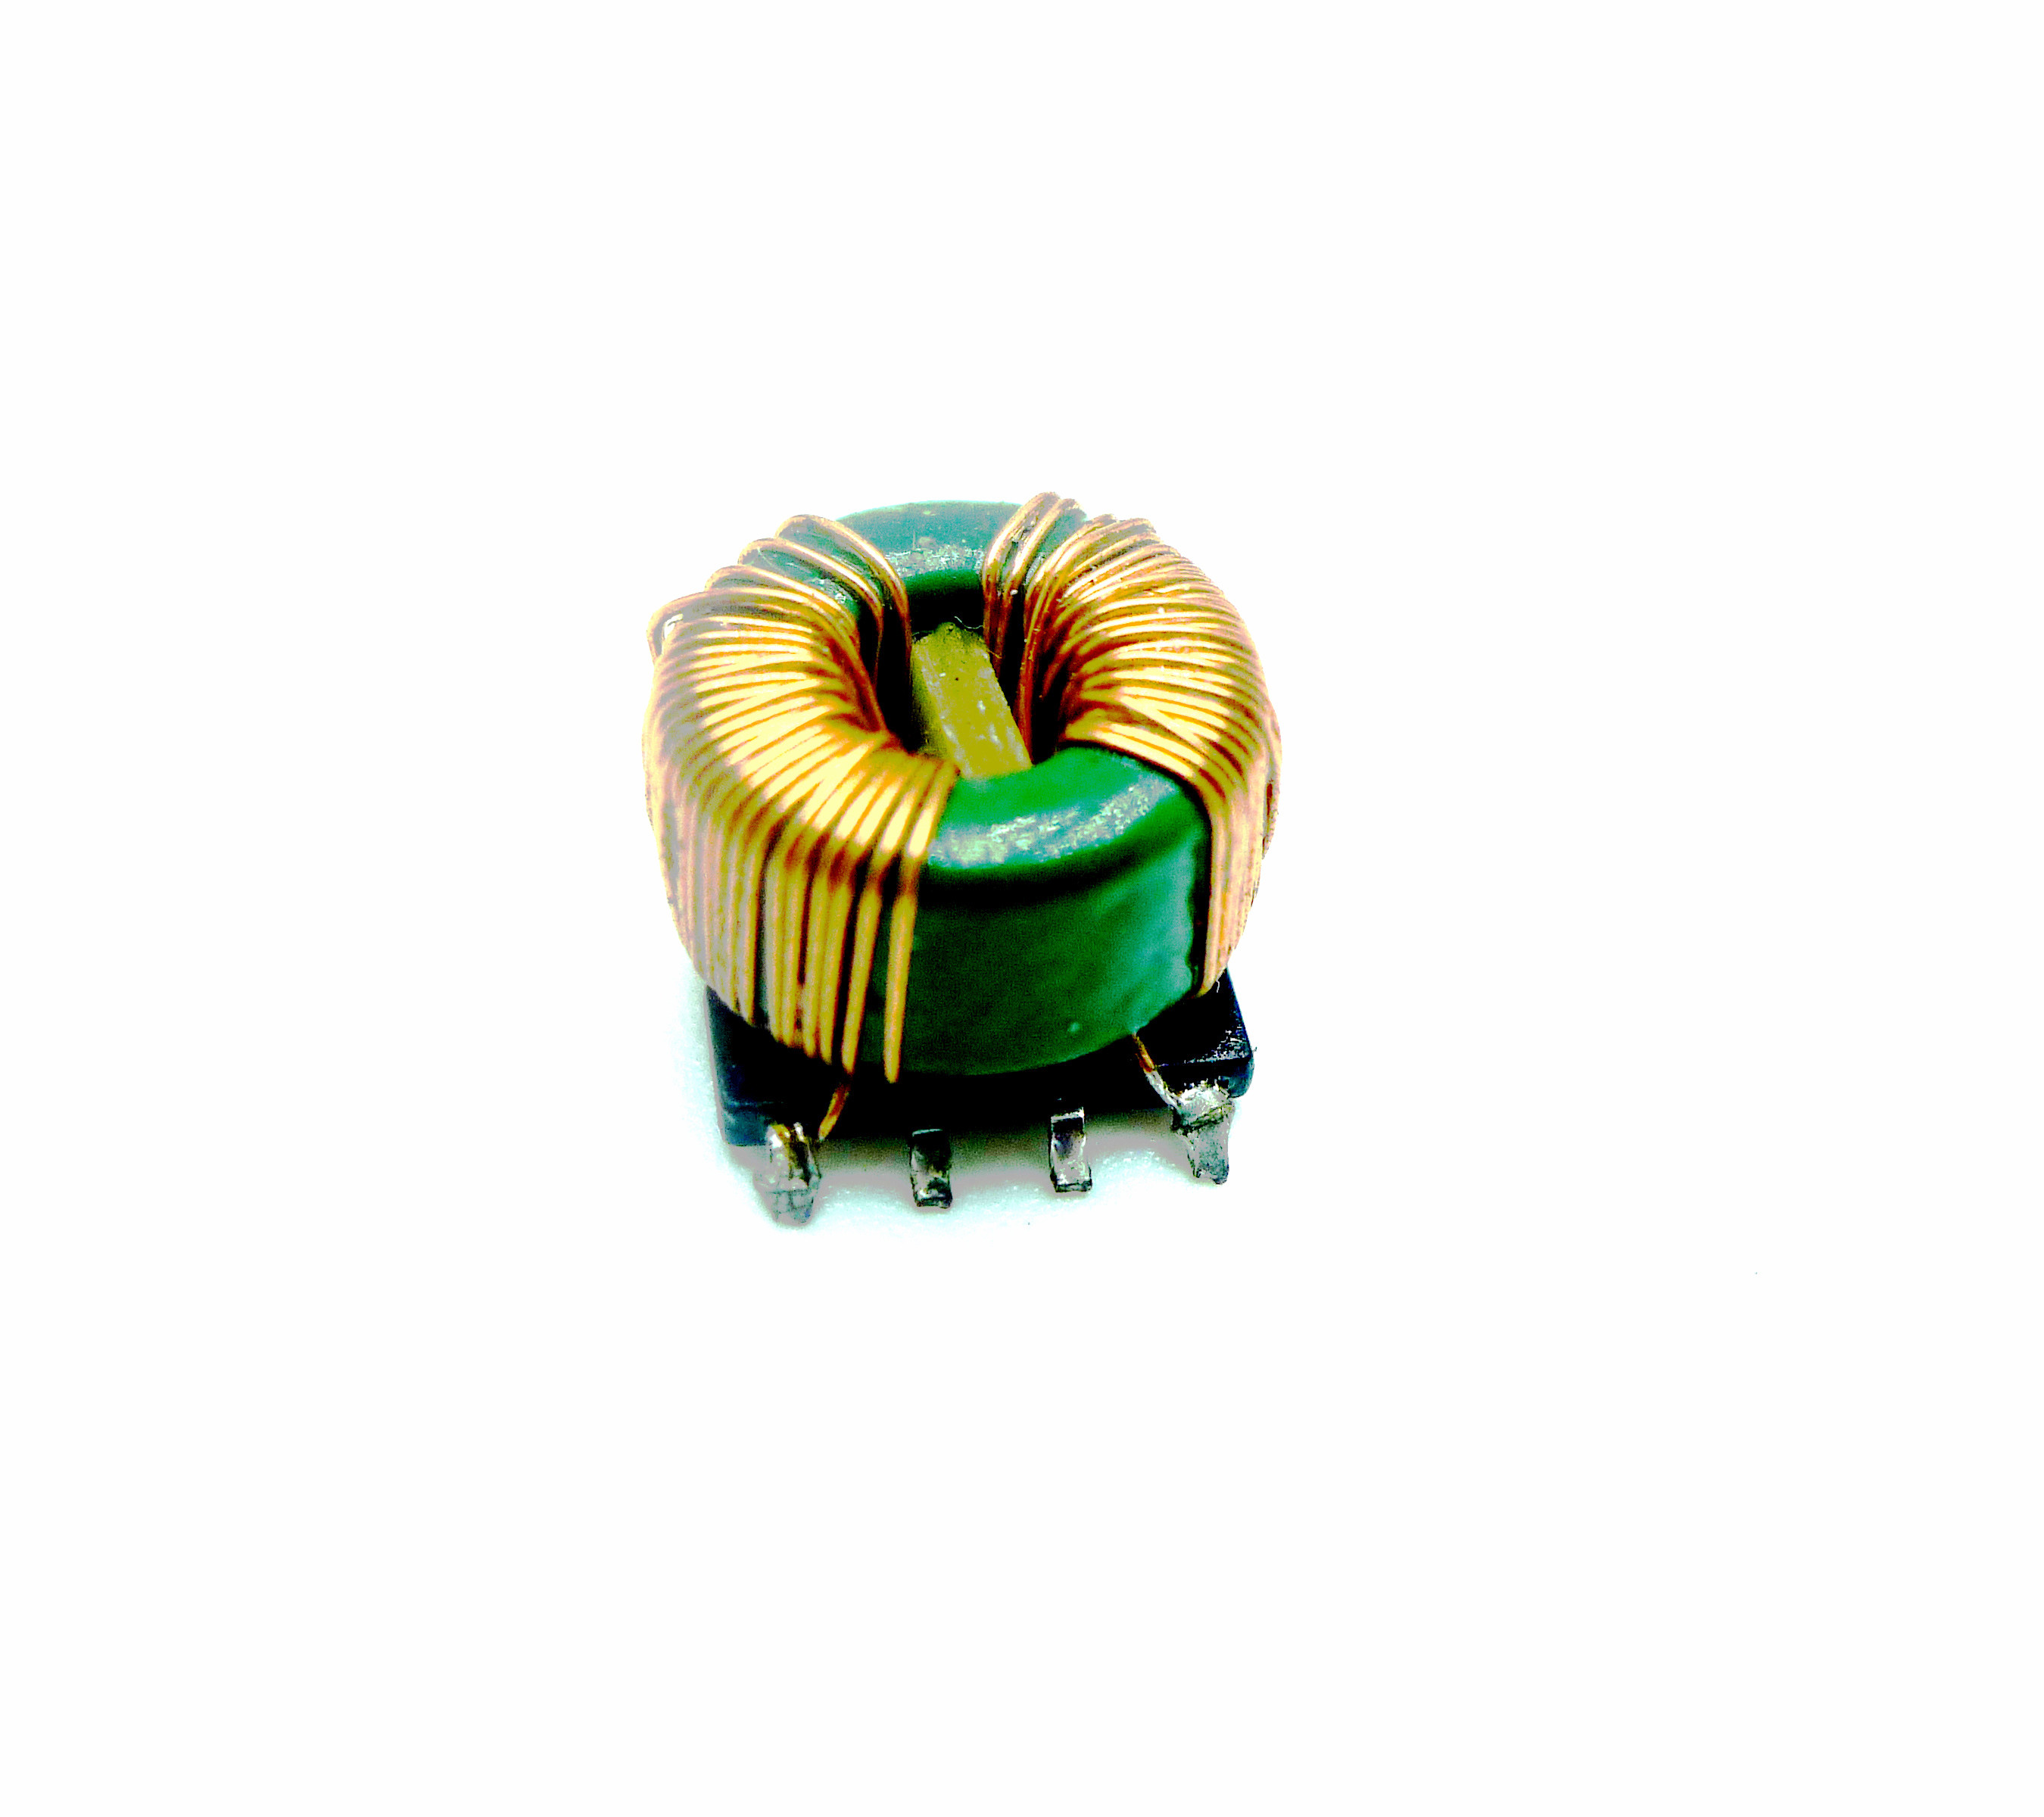 Cheap SMD Toroidal Common mode Choke Coil,PSCM1006-302M Series Available in Various Sizes,Comes with Large Current and Low wholesale